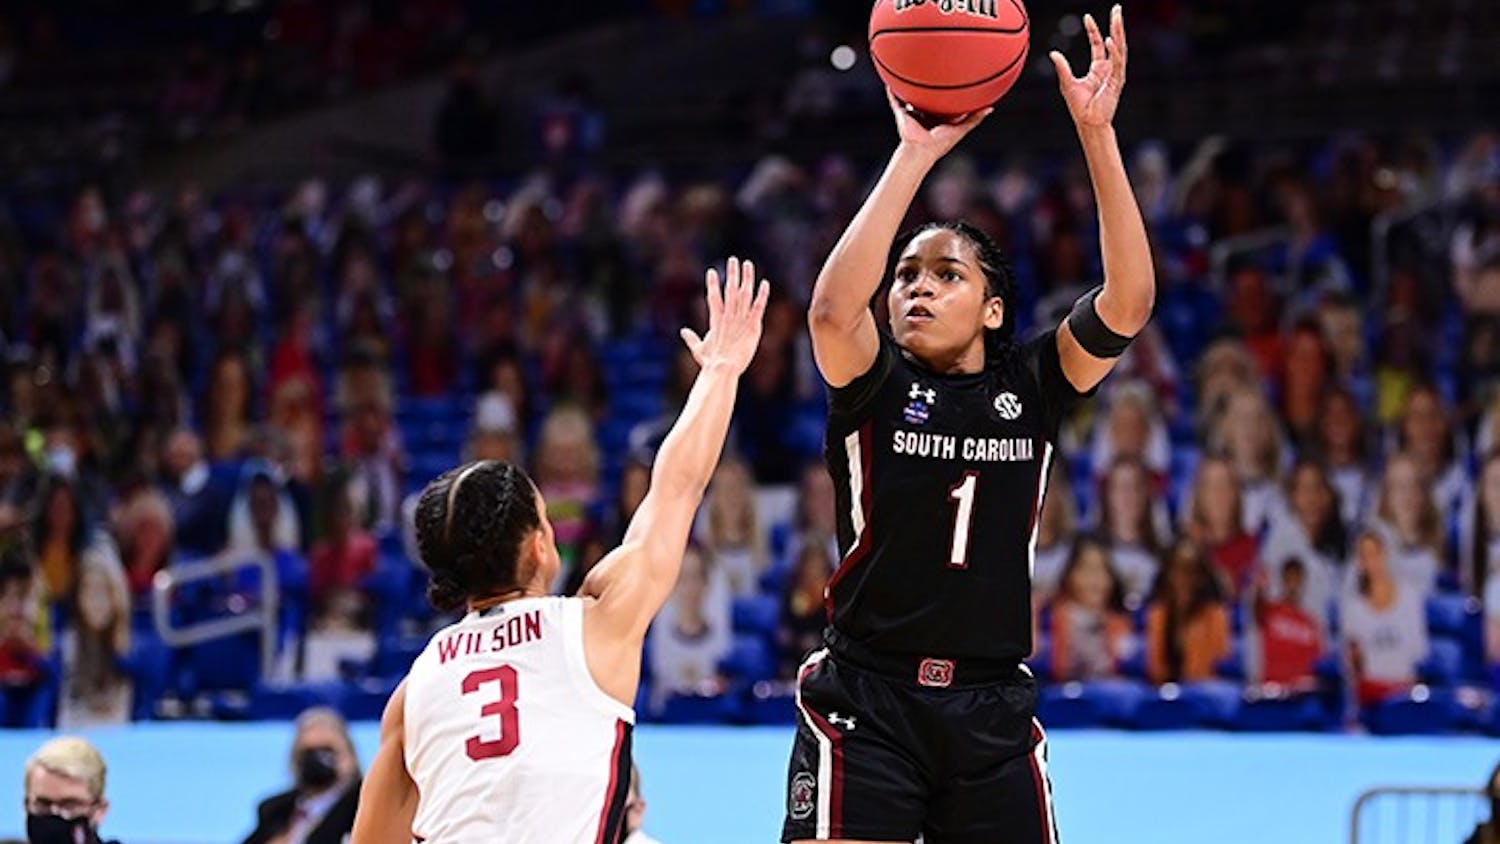 &nbsp;Sophomore guard Zia Cooke shoots over Stanford Cardinal Anna Wilson during the semifinals of the NCAA Women’s Basketball Tournament at the Alamodome on April 2, 2021 in San Antonio, Texas.&nbsp;